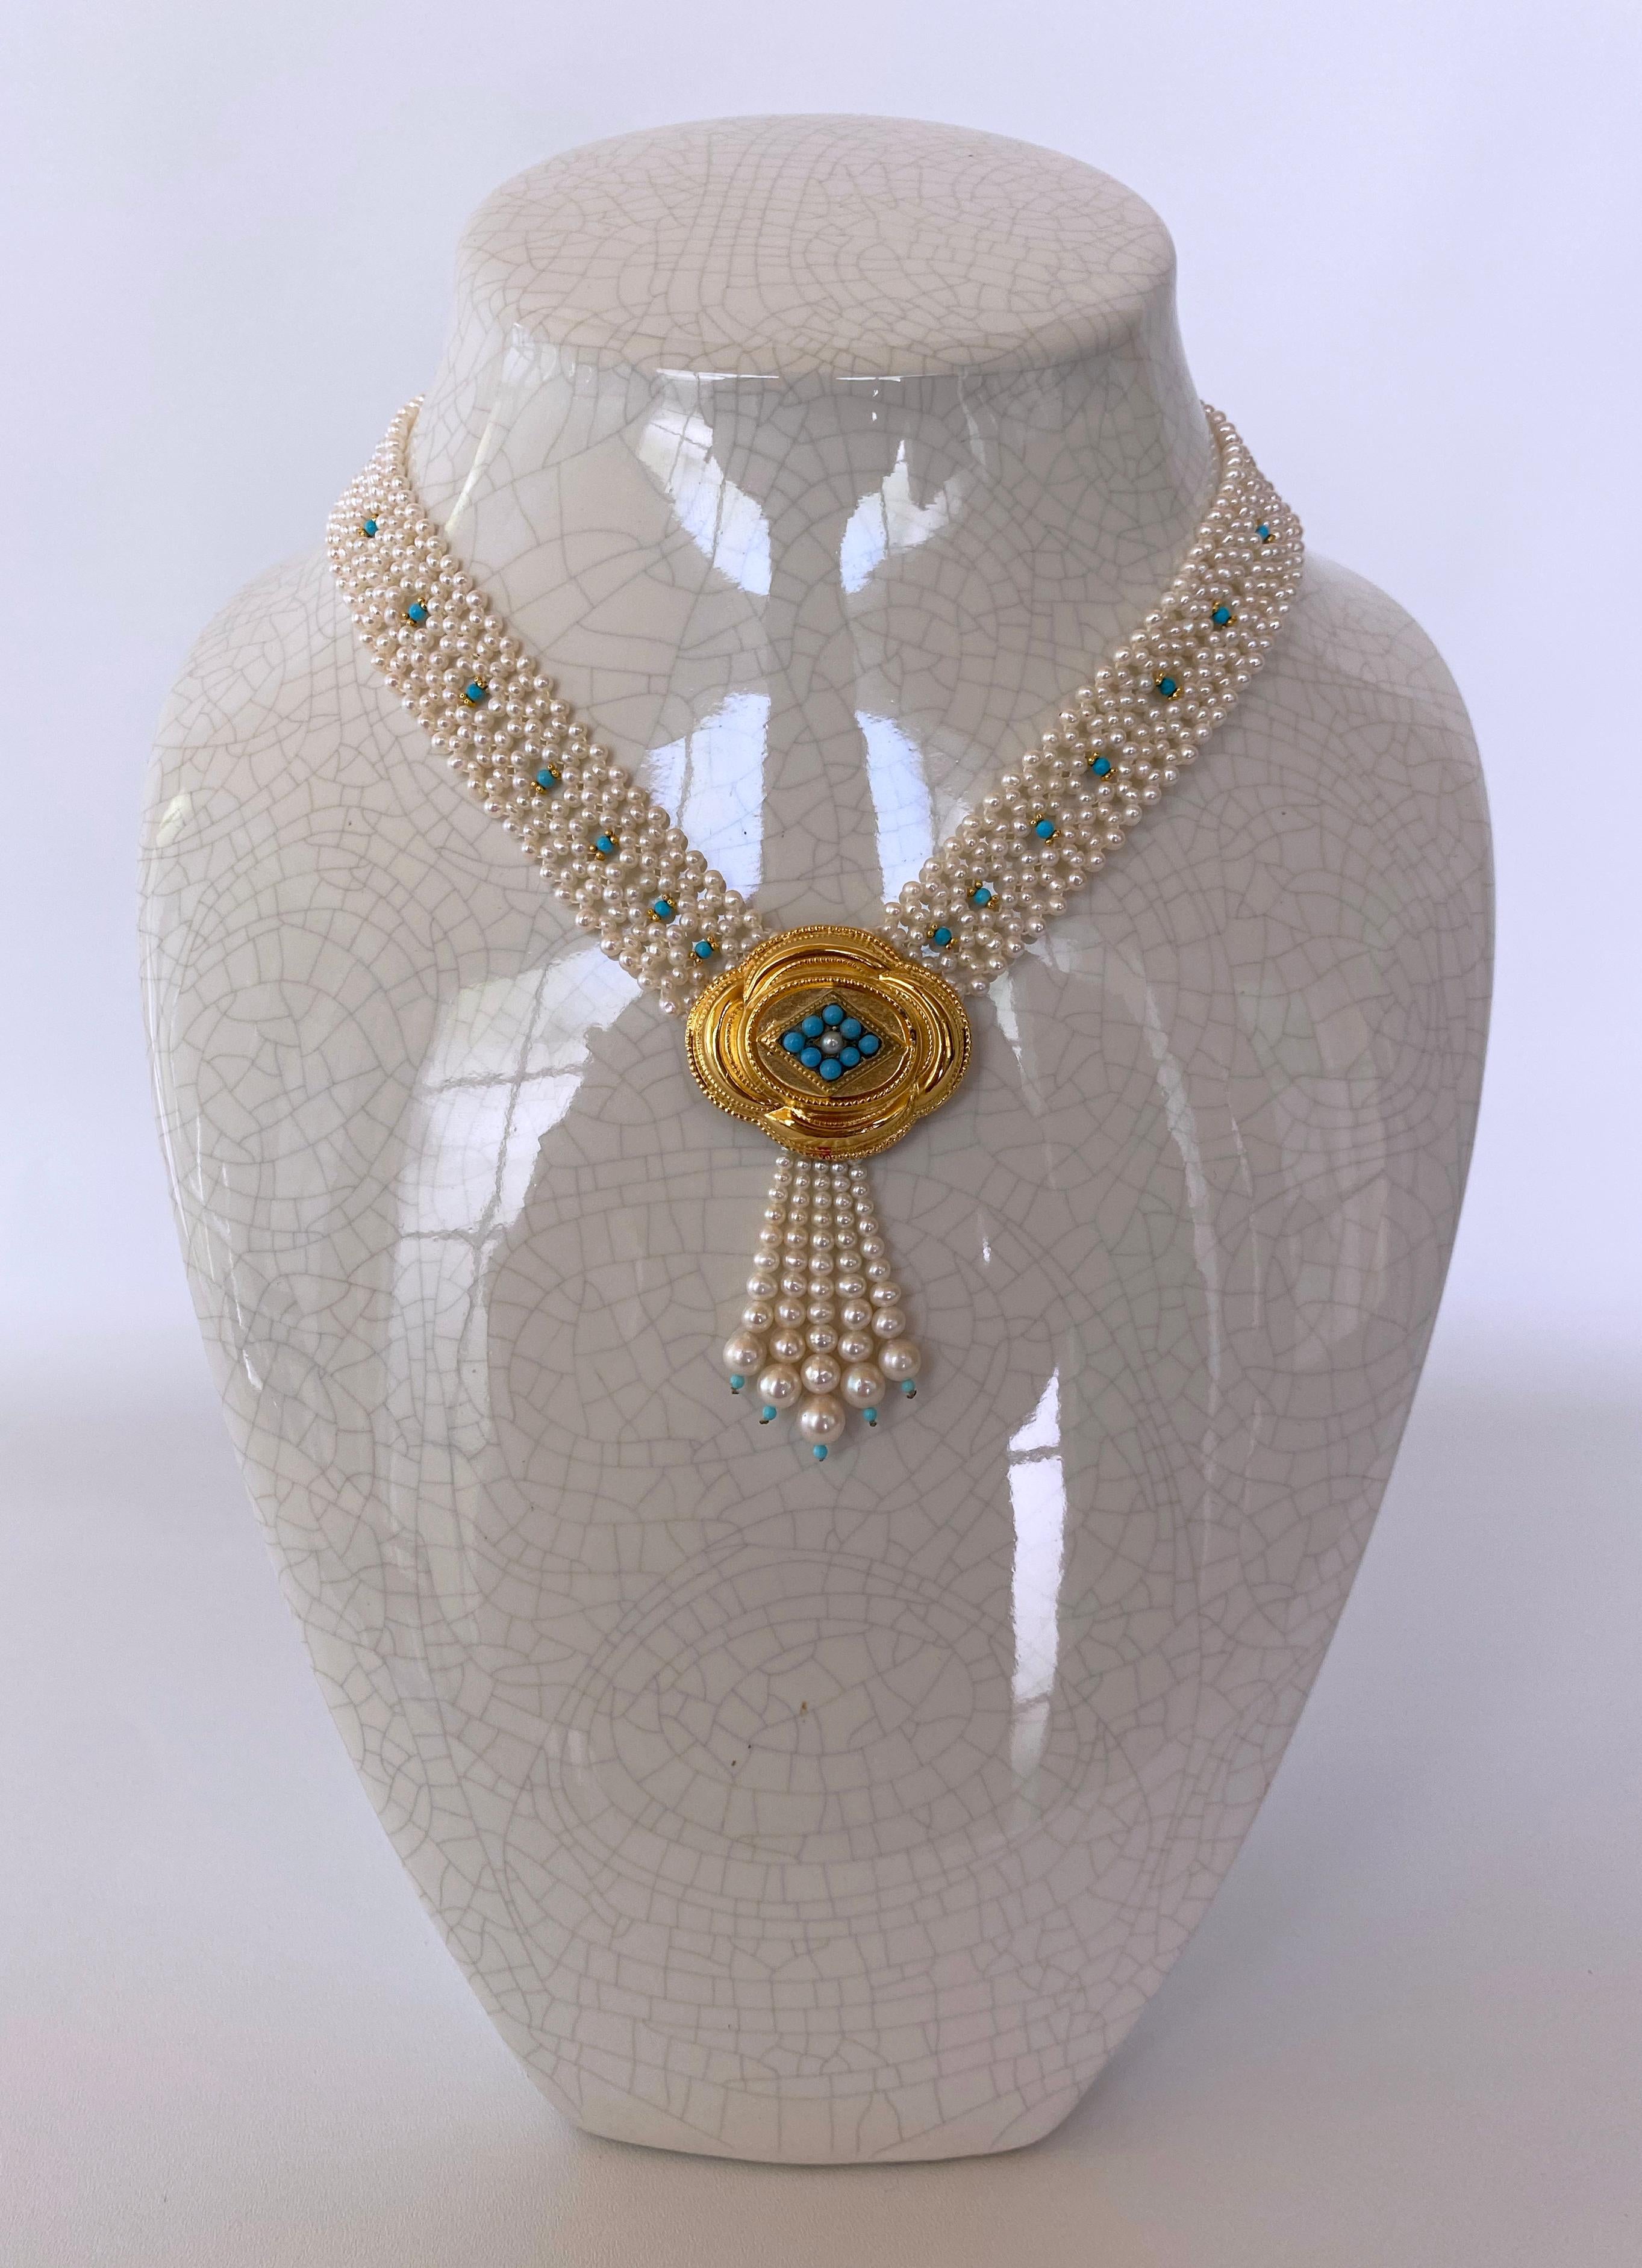 Gorgeous piece made in Los Angeles by Marina J. This lovely Victorian inspired Necklace is hand woven into a tight lace like design, using all Cultured White Pearls displaying beautiful sheen and iridescence. Small Turquoise and 14k Yellow Gold